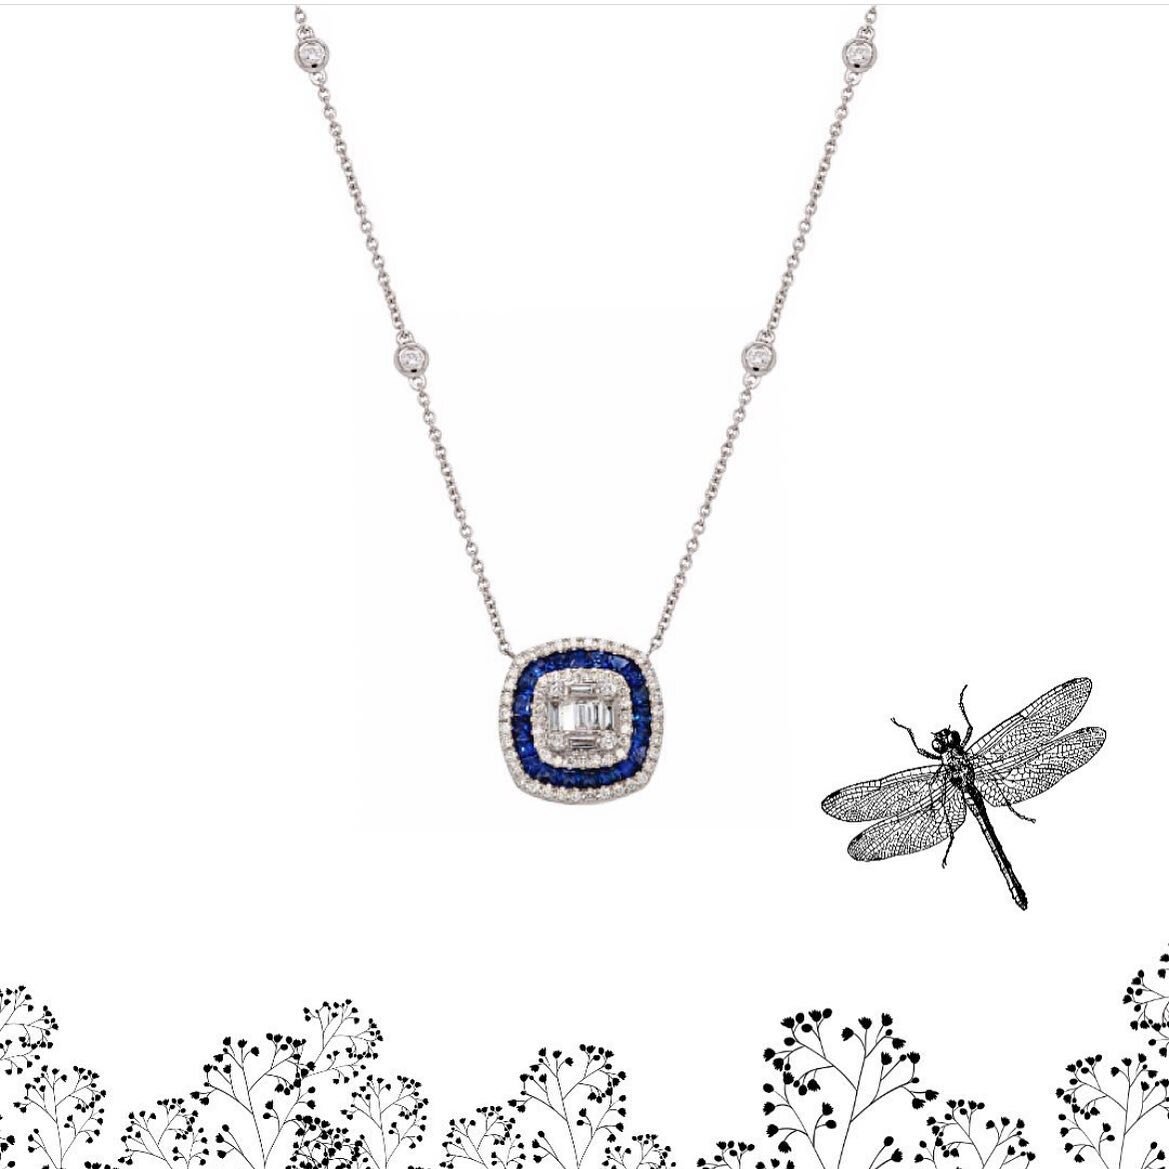 💎 Shine Bright Like a Diamond.

✨Discover The Gold Collection at Nava Dee.

✨14k White Gold Diamond and Sapphire Necklace.
 

Want to see this beauty in person? DM for store locations 📍

#jewelry #accessories #gold #giftideas #silver #ring #jewelry